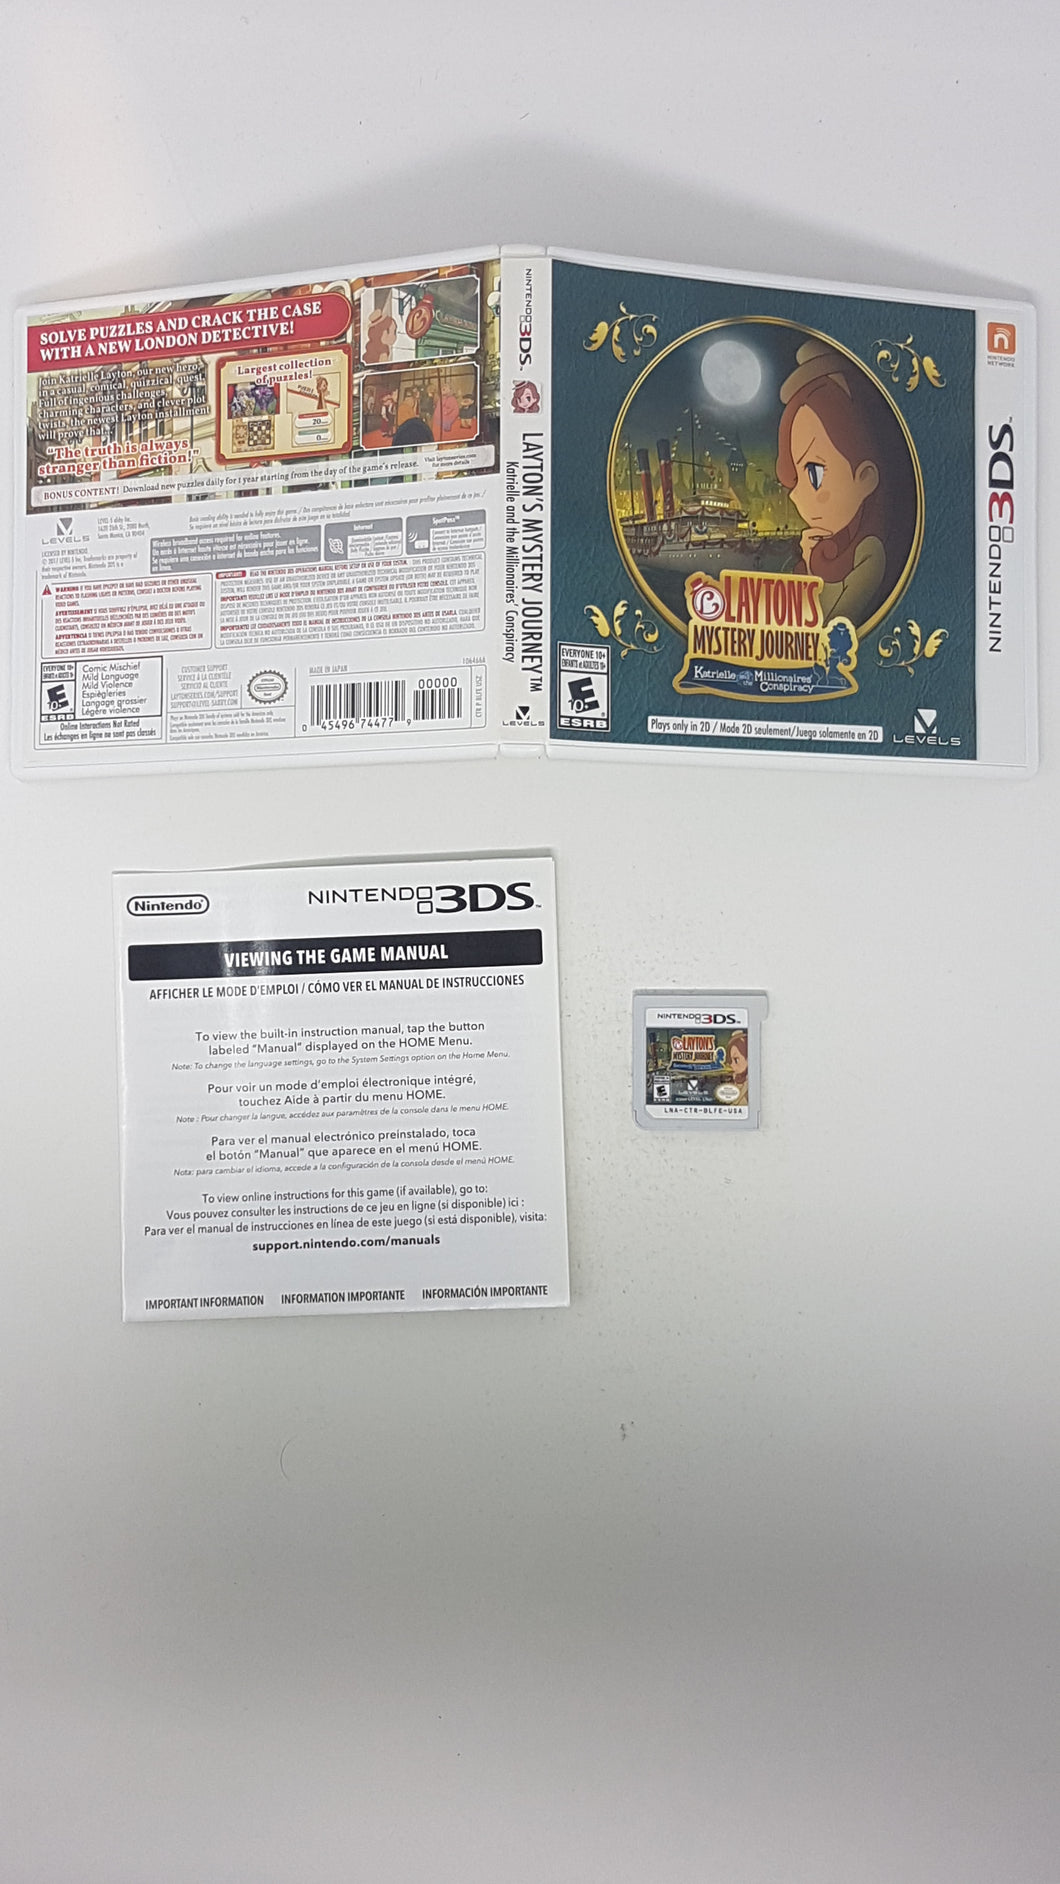 Layton's Mystery Journey - Katrielle and the Millionaires' Conspiracy - Nintendo 3DS